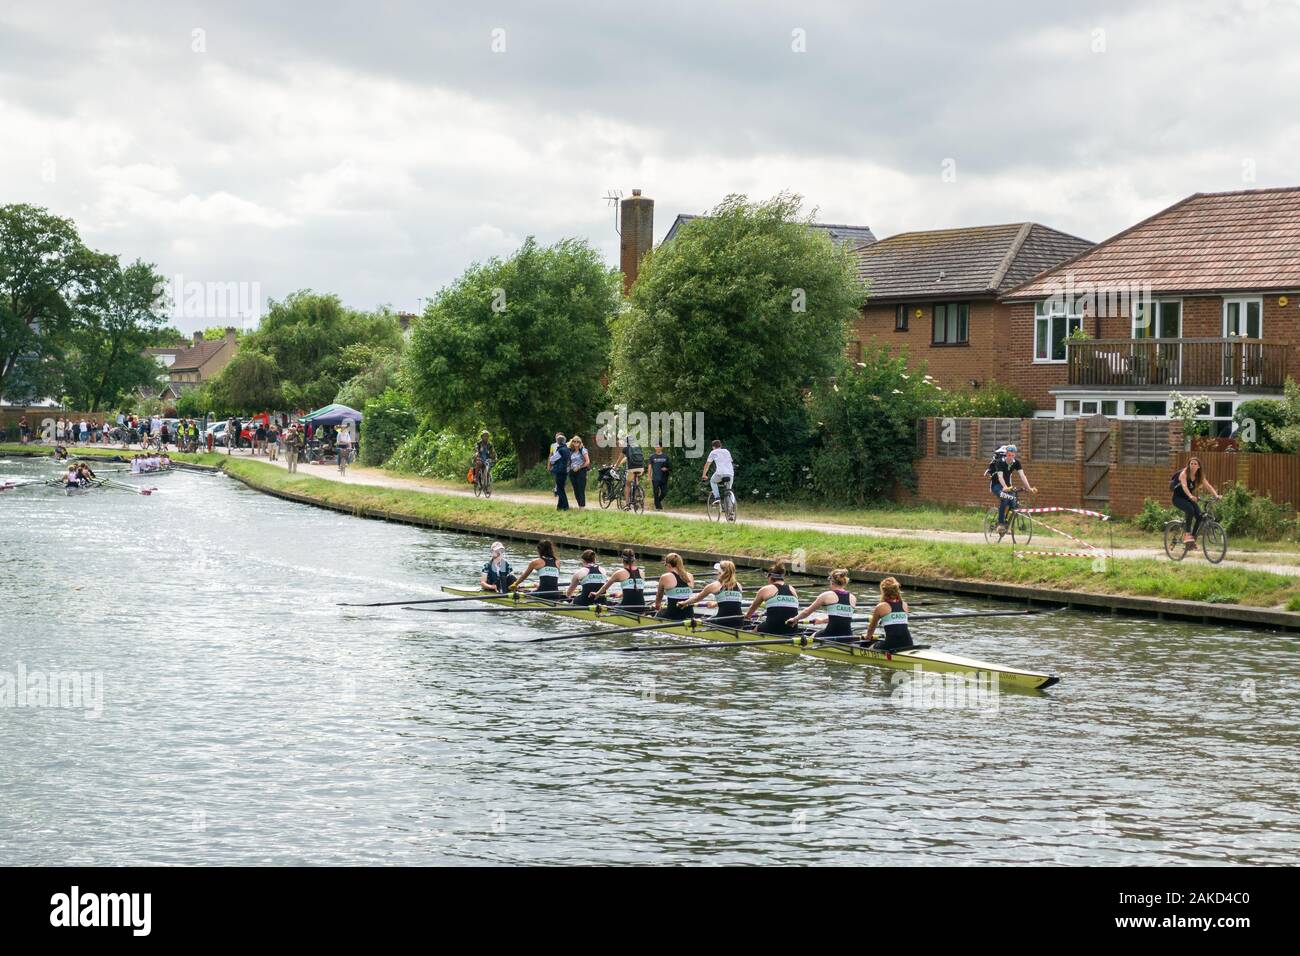 Caius Female boat crew on the river Cam taking part in The Bumps row boat regatta in Summer, Cambridge, UK Stock Photo